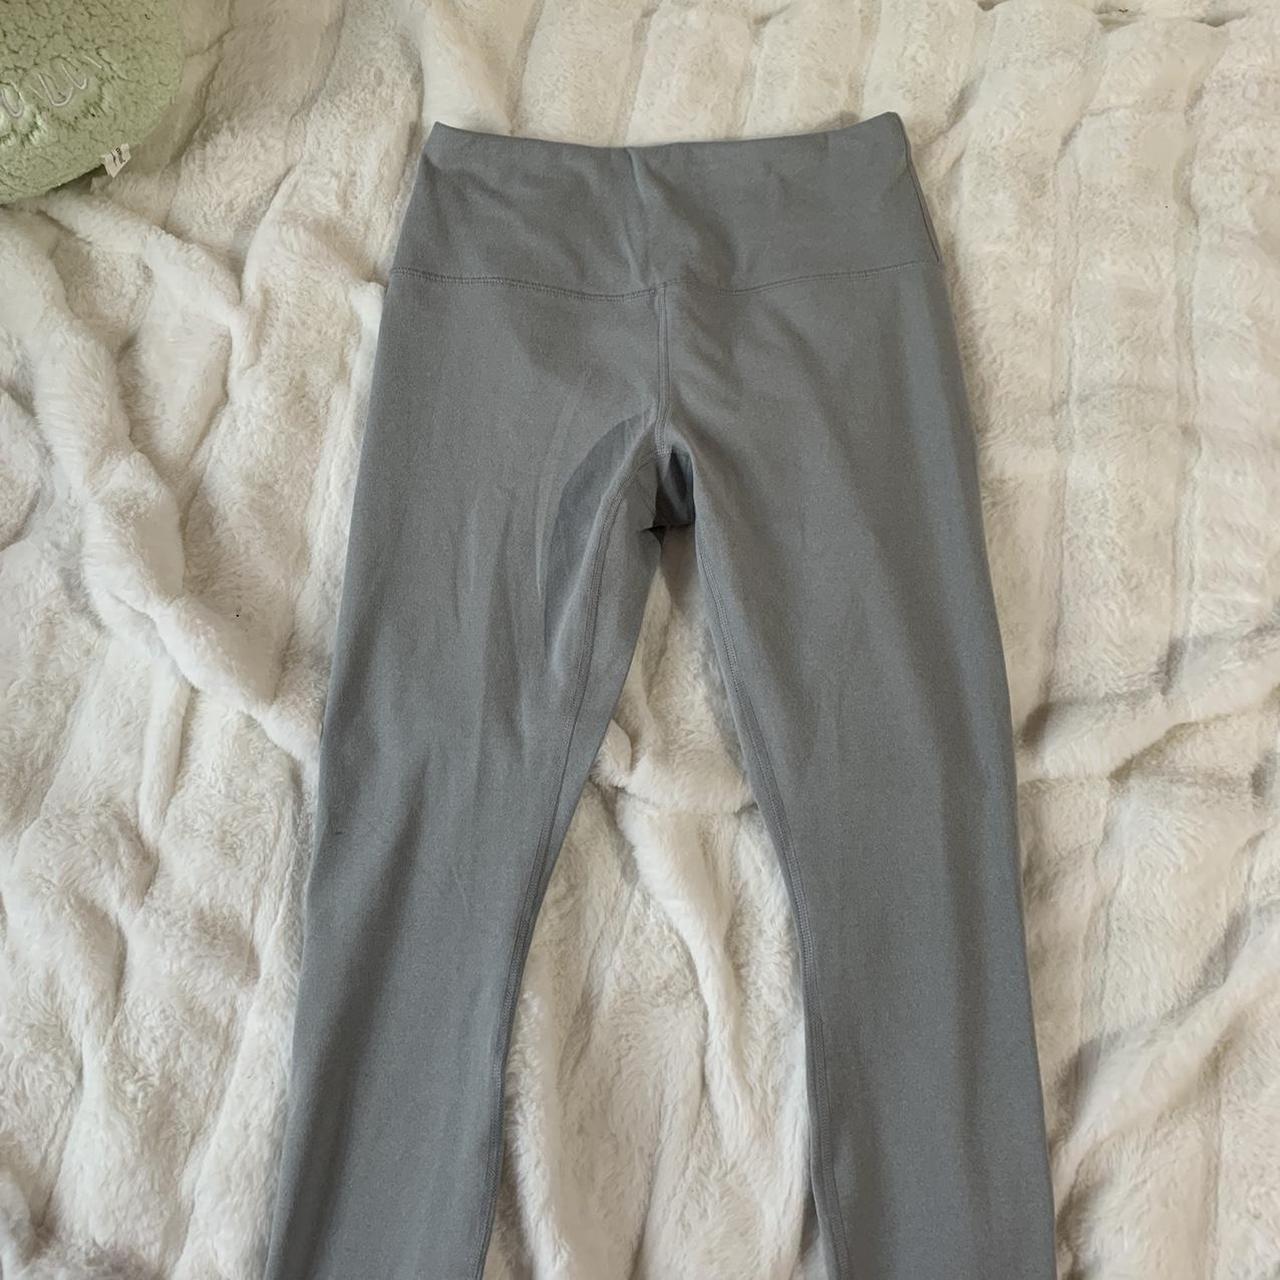 Light Gray Leggings from RBX Active Size - Depop